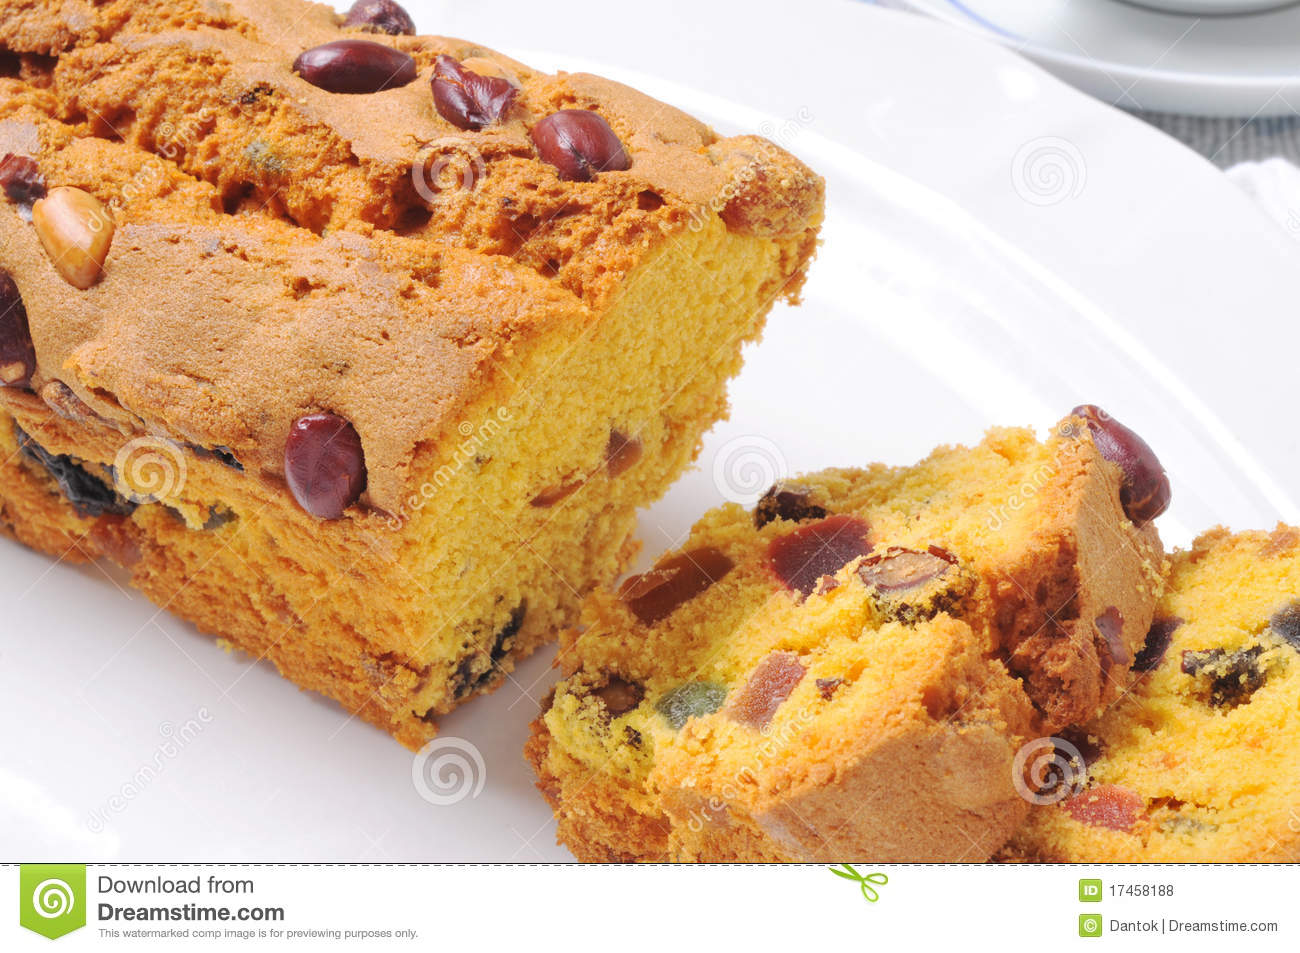 Bread Pudding Royalty Free Stock Photos   Image  17458188